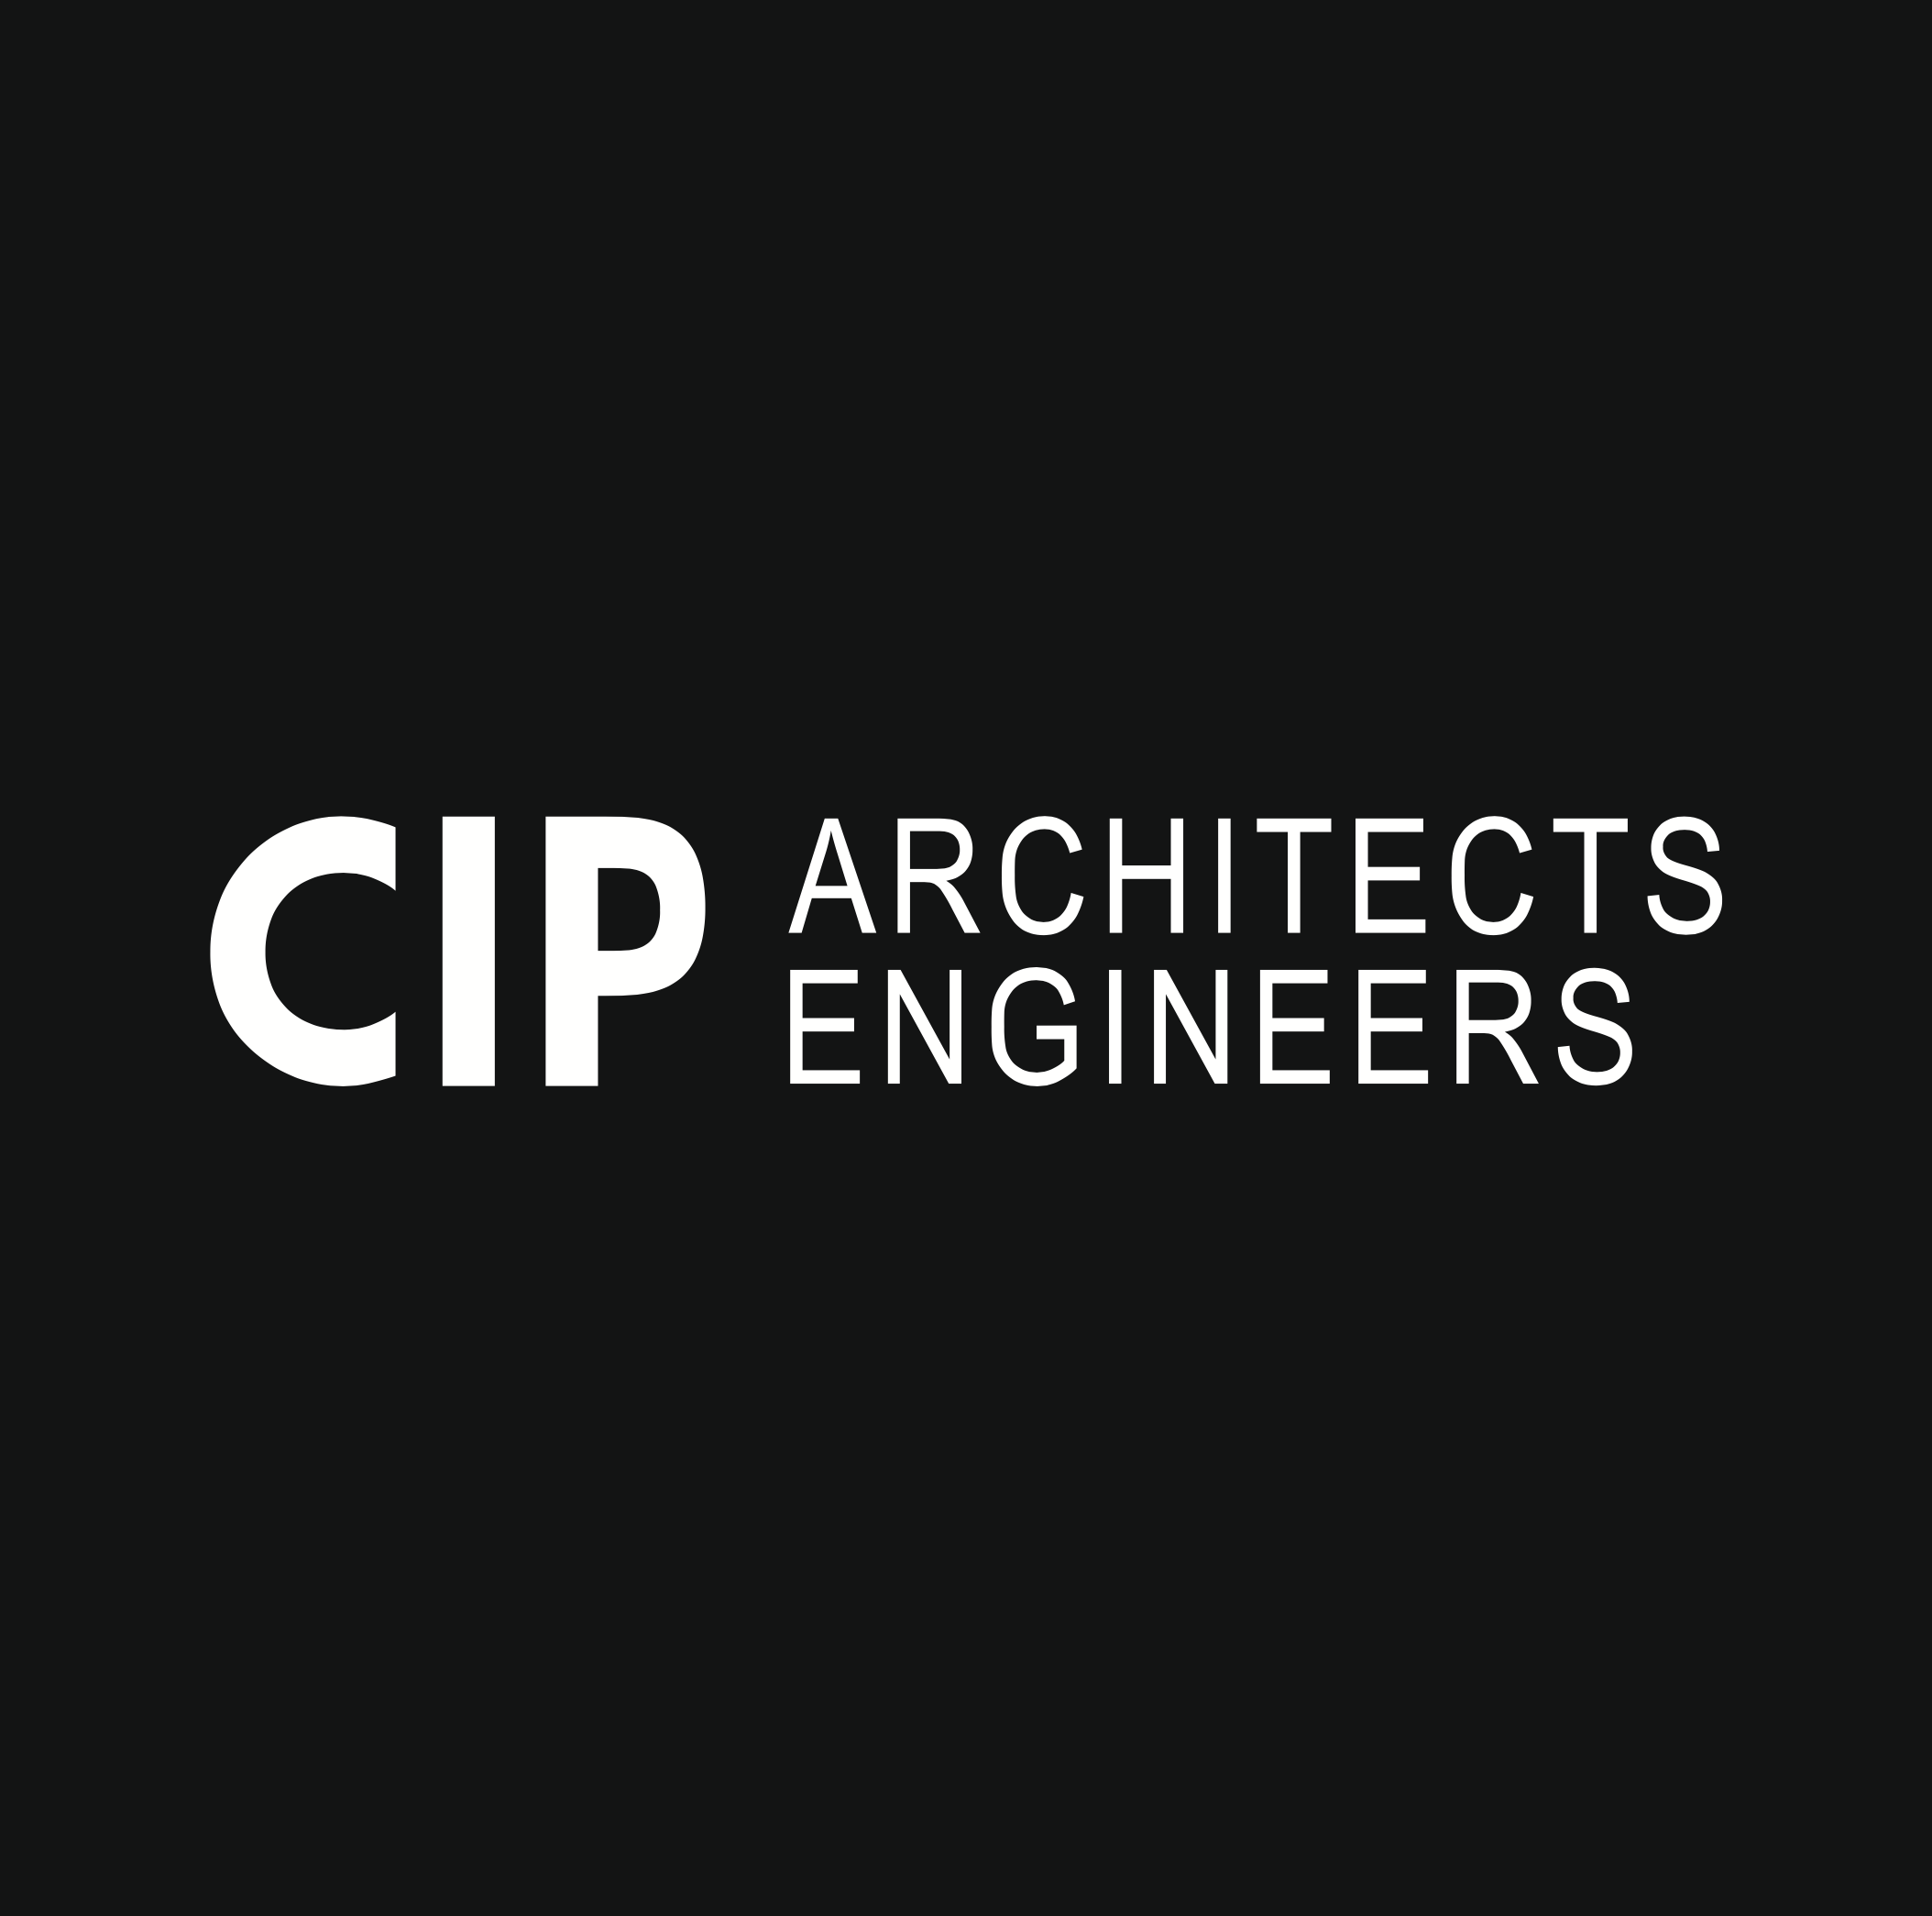 CIP architects engineers 